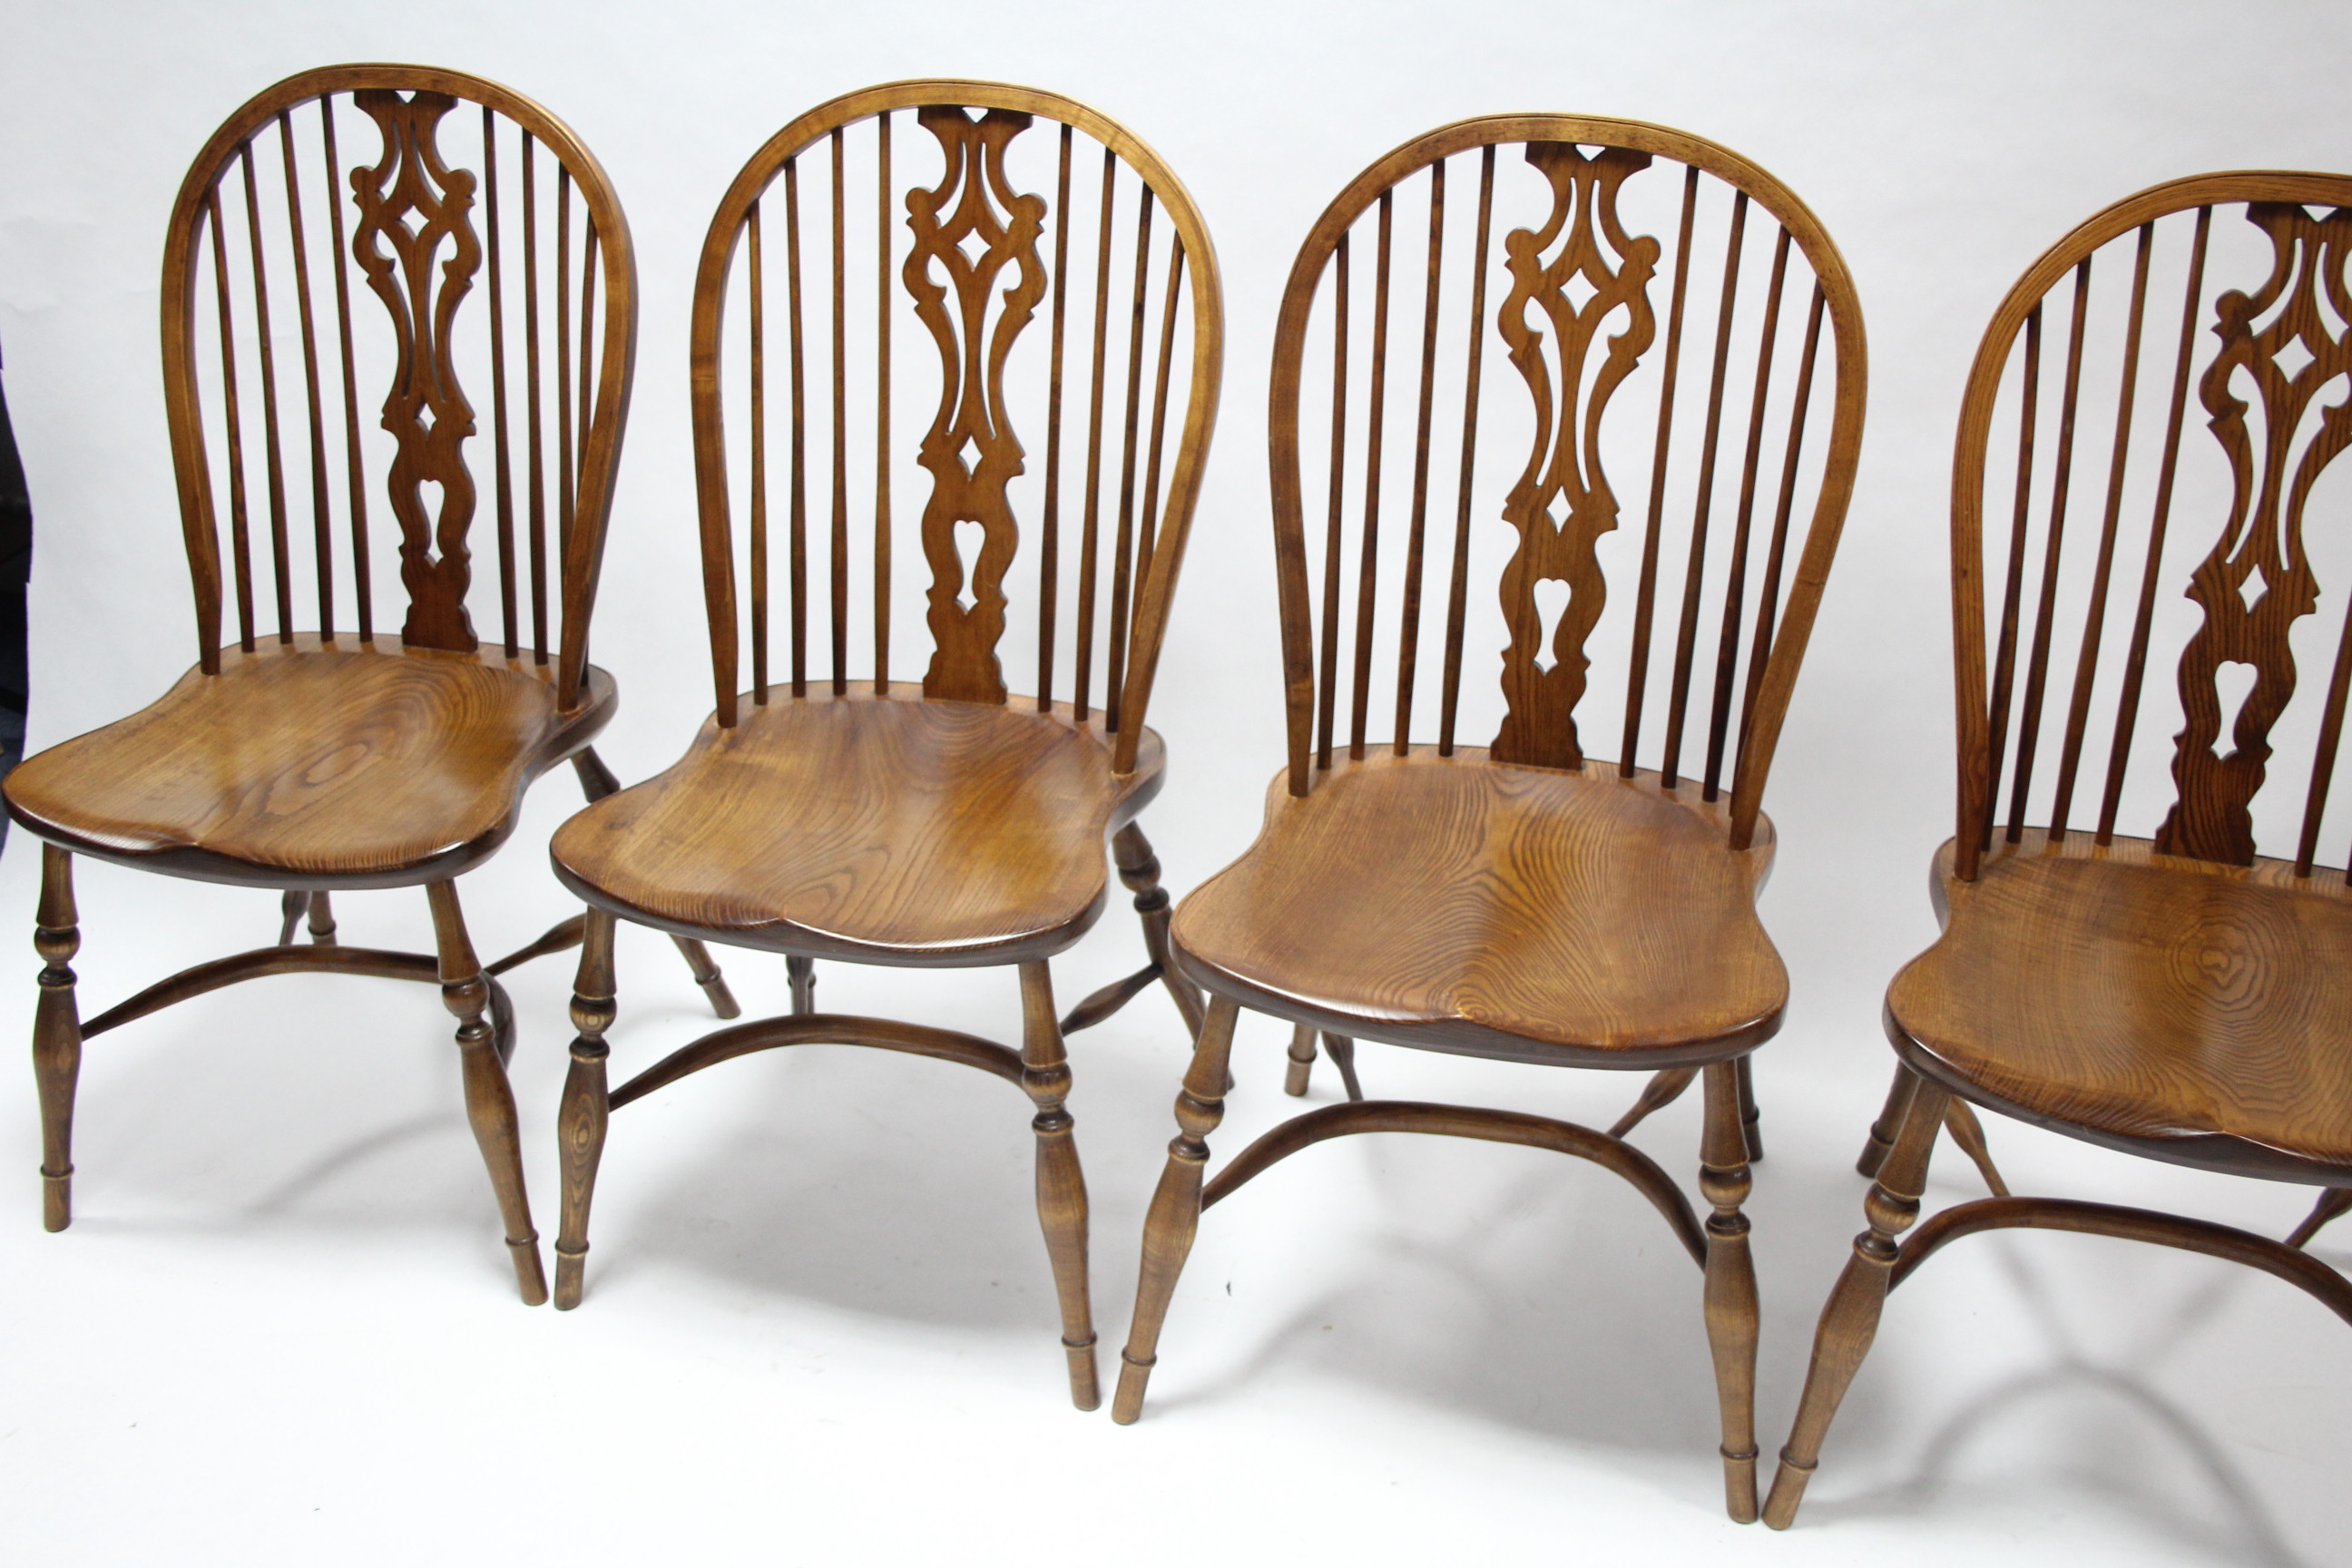 GOOD QUALITY SET OF SIX 19th CENTURY WINDSOR-STYLE DINING CHAIRS (including a pair of carvers), with - Image 3 of 7